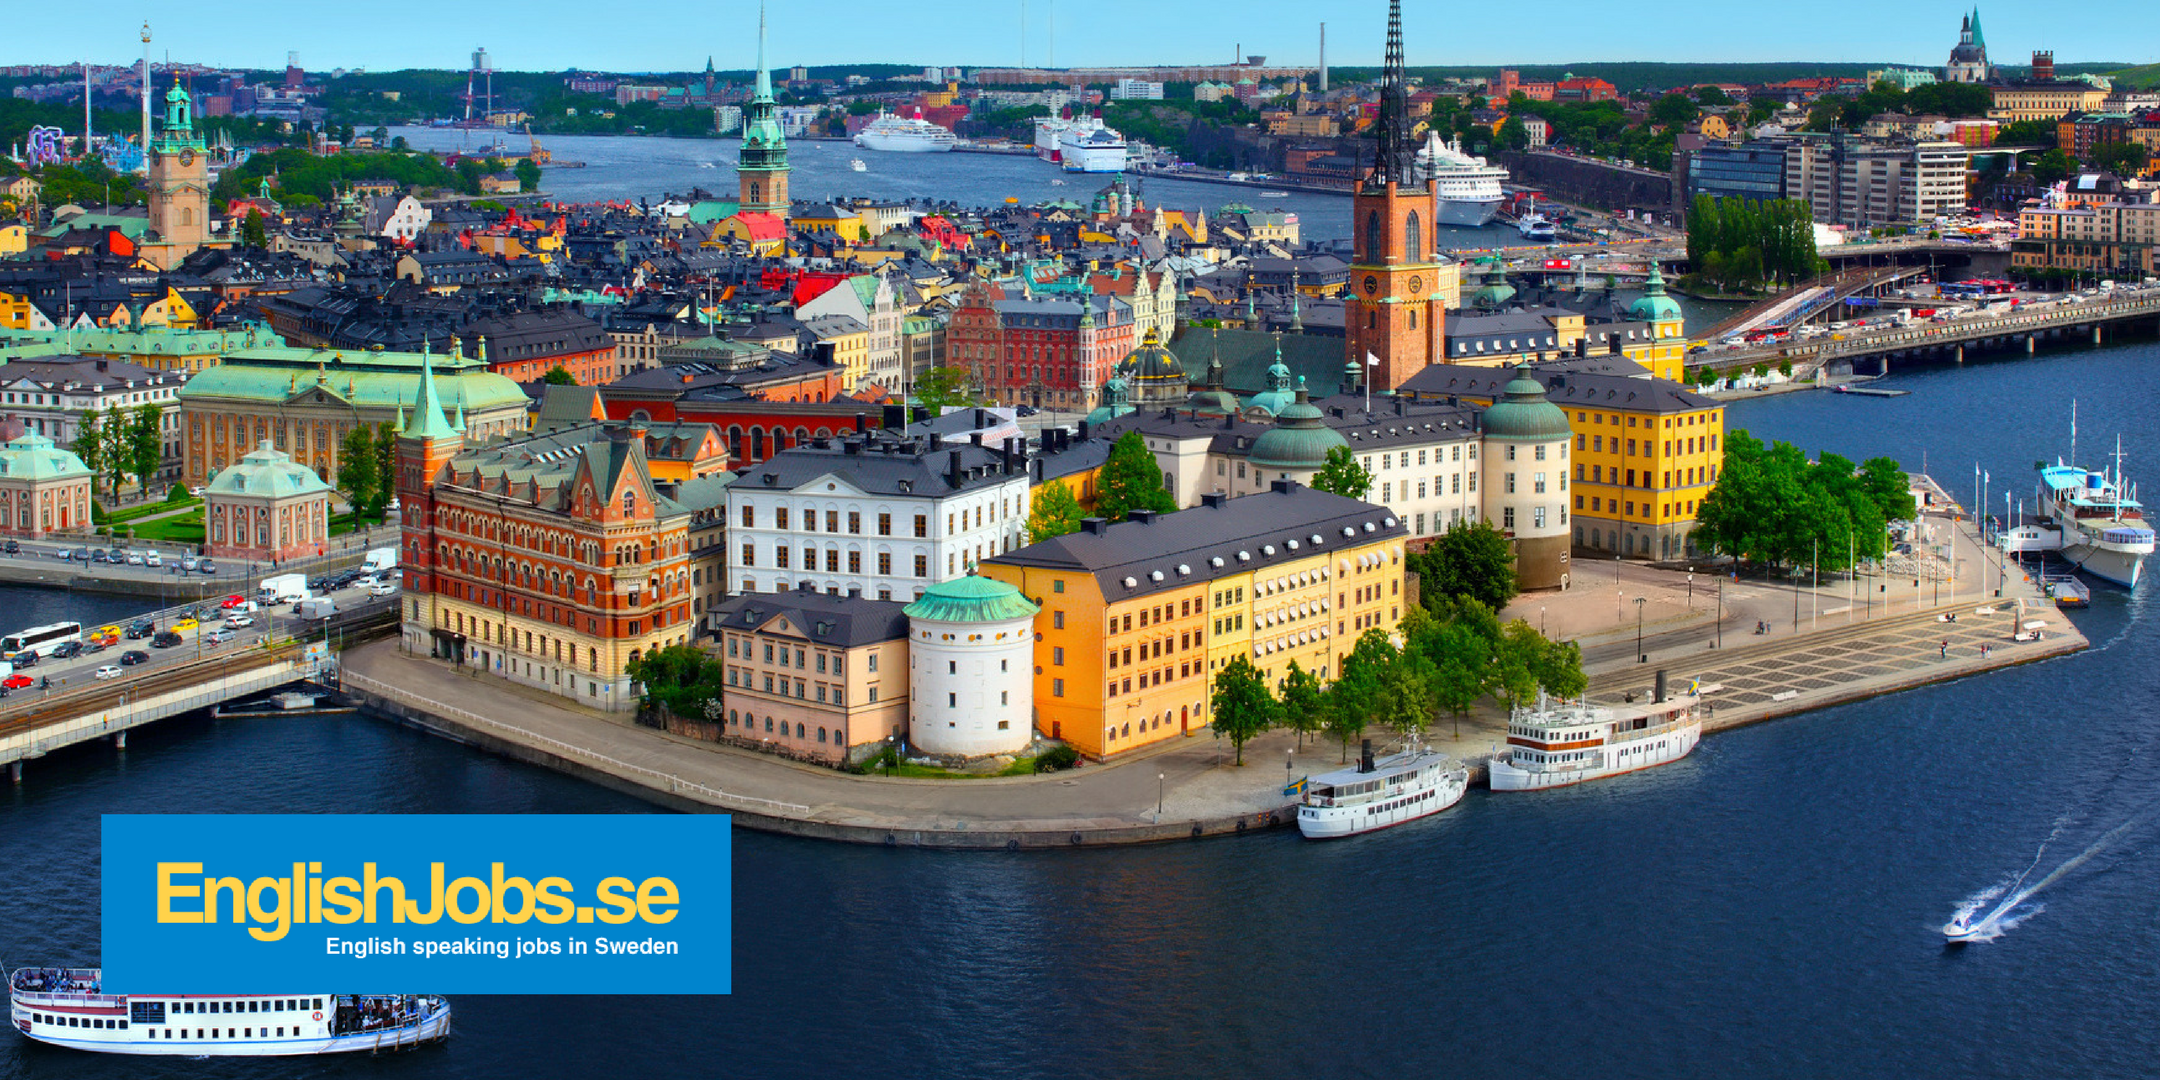 Work in Europe (Sweden, Denmark, Germany) - Your job search from New York to Stockholm